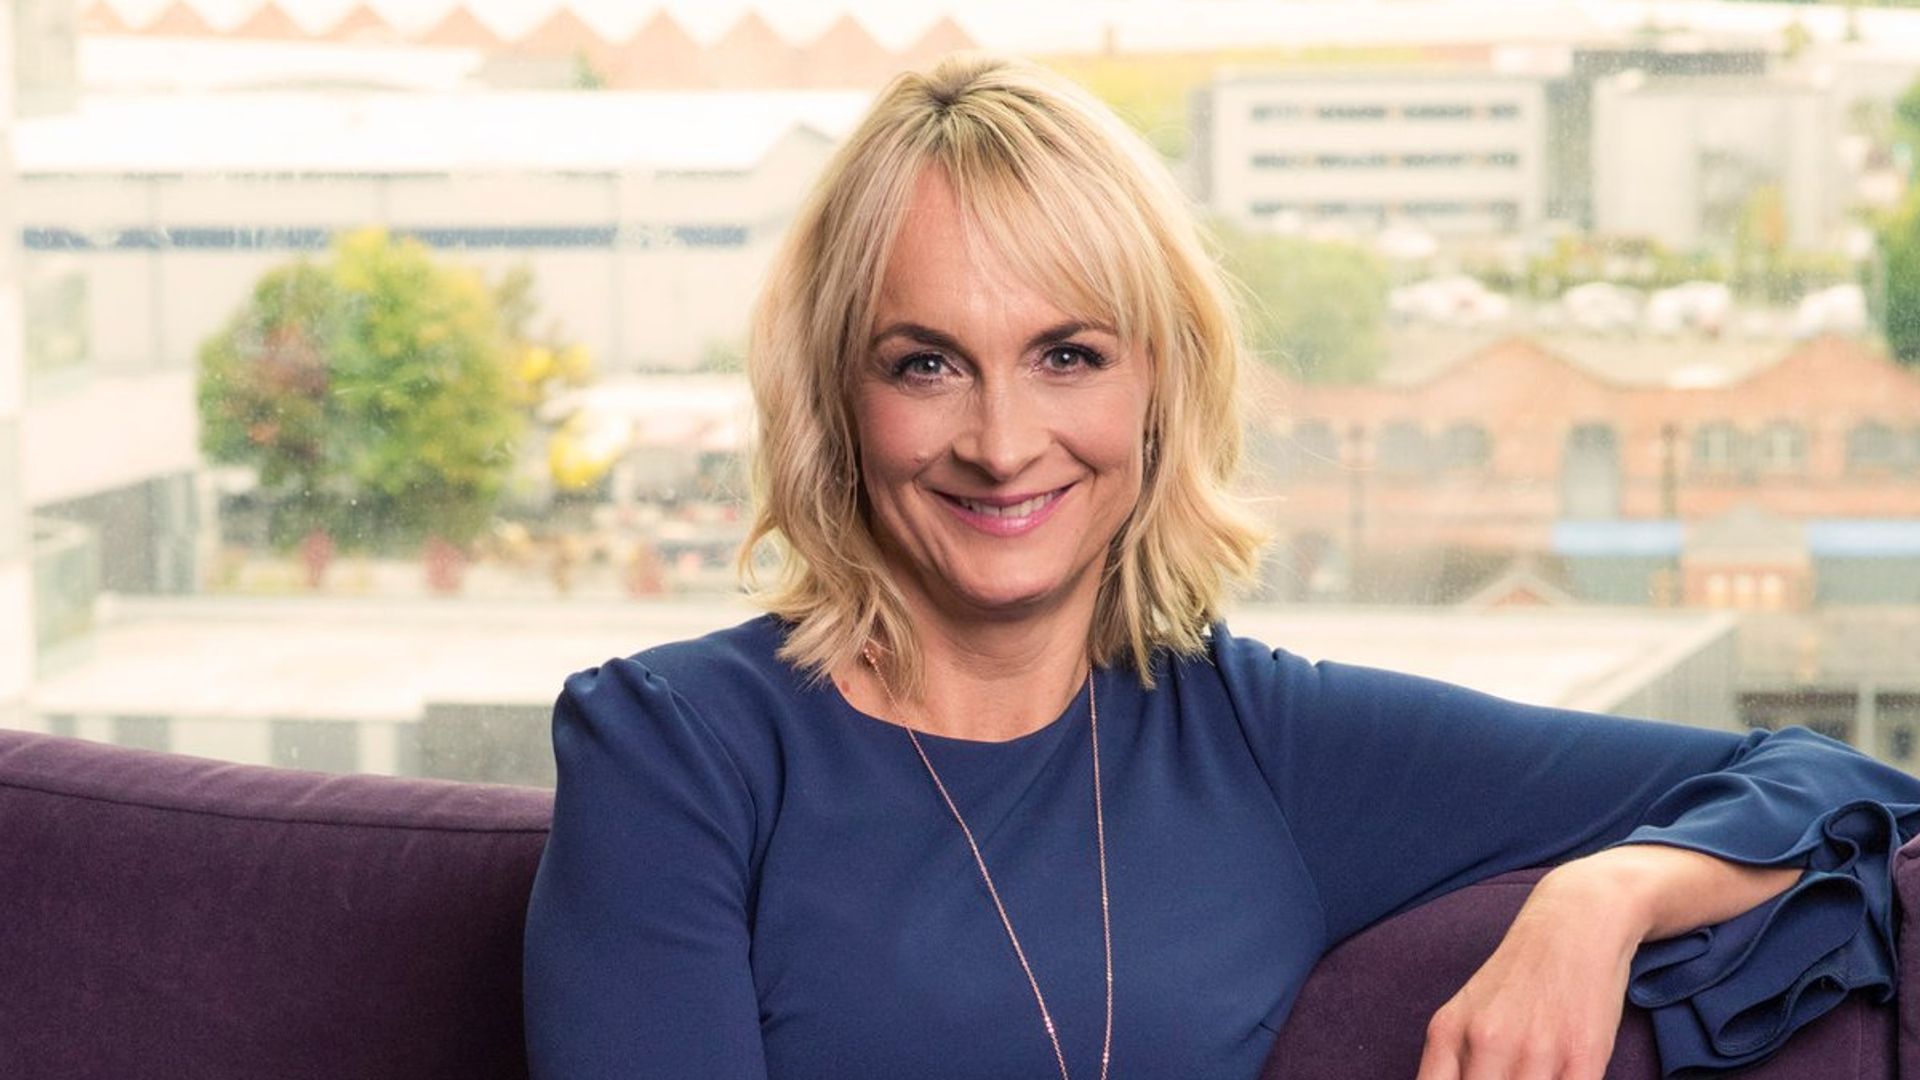 Is BBC Breakfast's Louise Minchin heading to Strictly Come Dancing 2021?